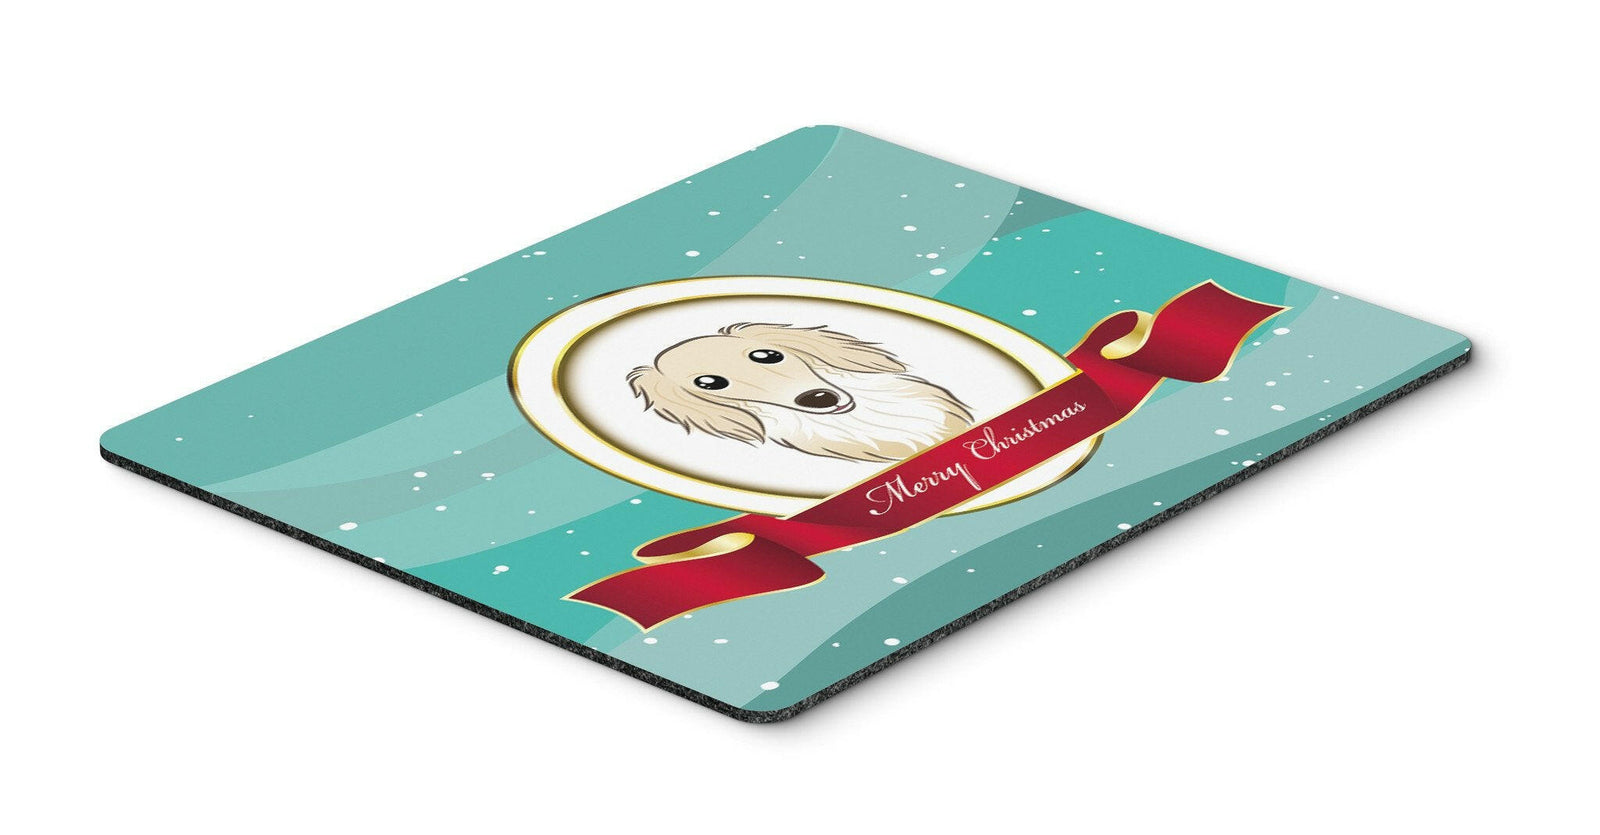 Longhair Creme Dachshund Merry Christmas Mouse Pad, Hot Pad or Trivet BB1522MP by Caroline's Treasures